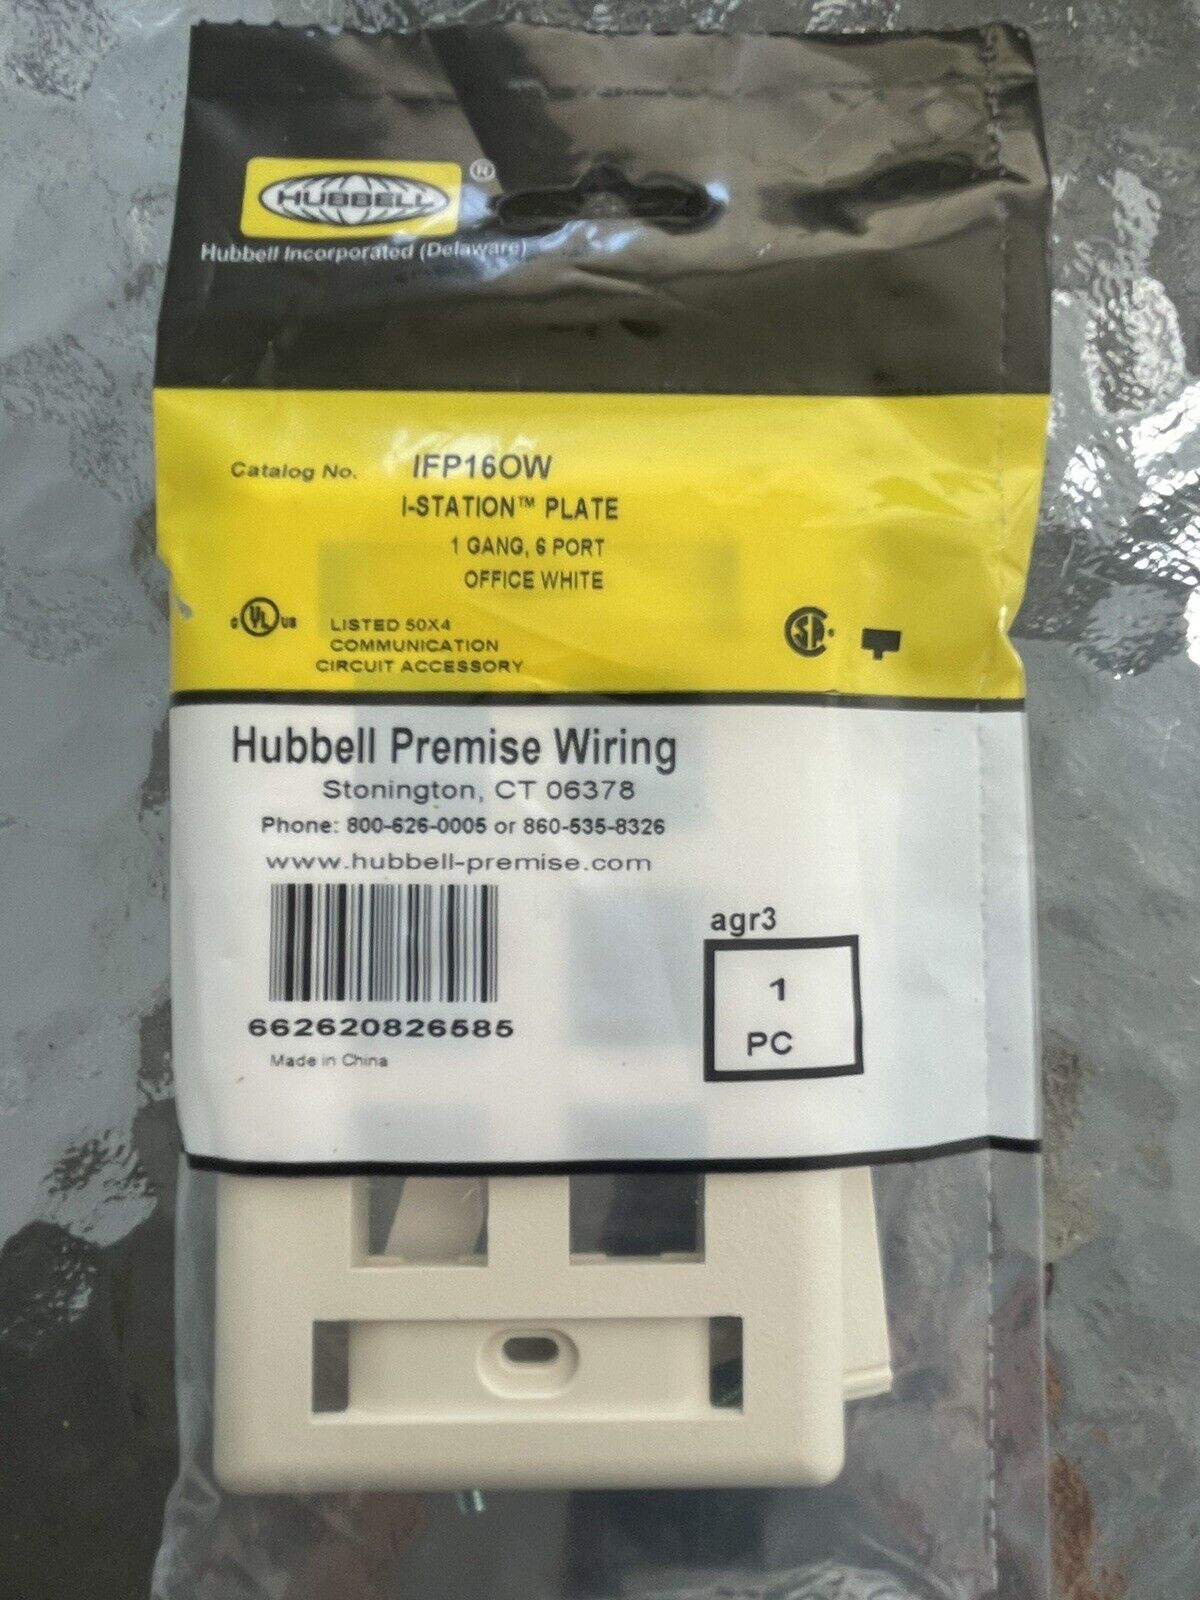 (32) HUBBELL PREMISE WIRING Wall Plate,6 Port, IFP16OW